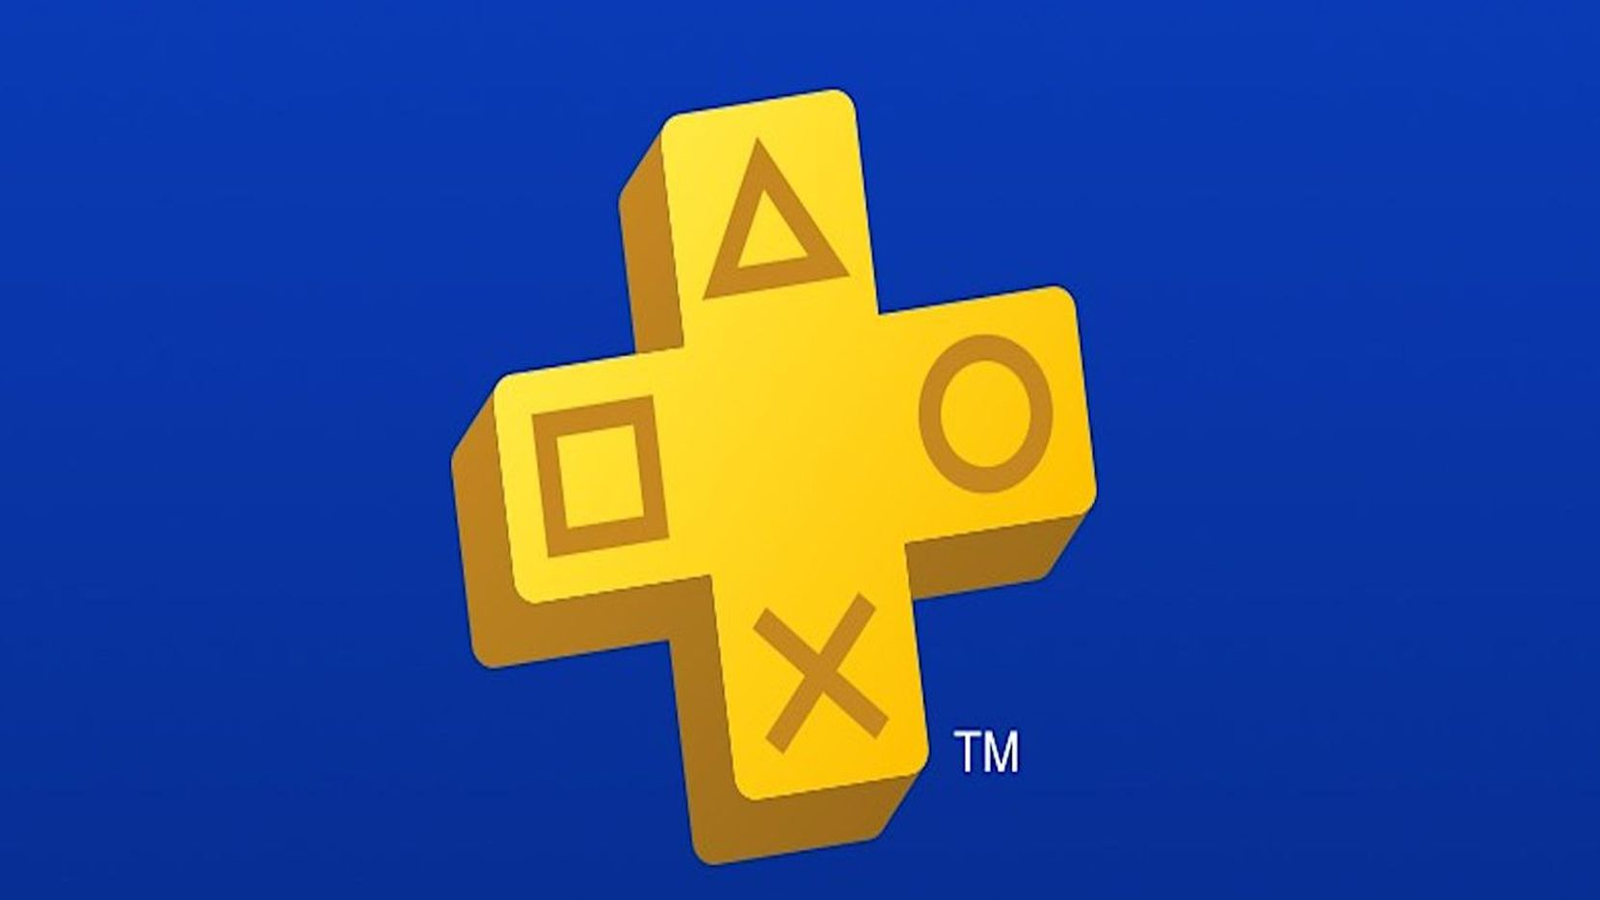 You Won't Need PS Plus to Play PS5, PS4 Online Multiplayer This